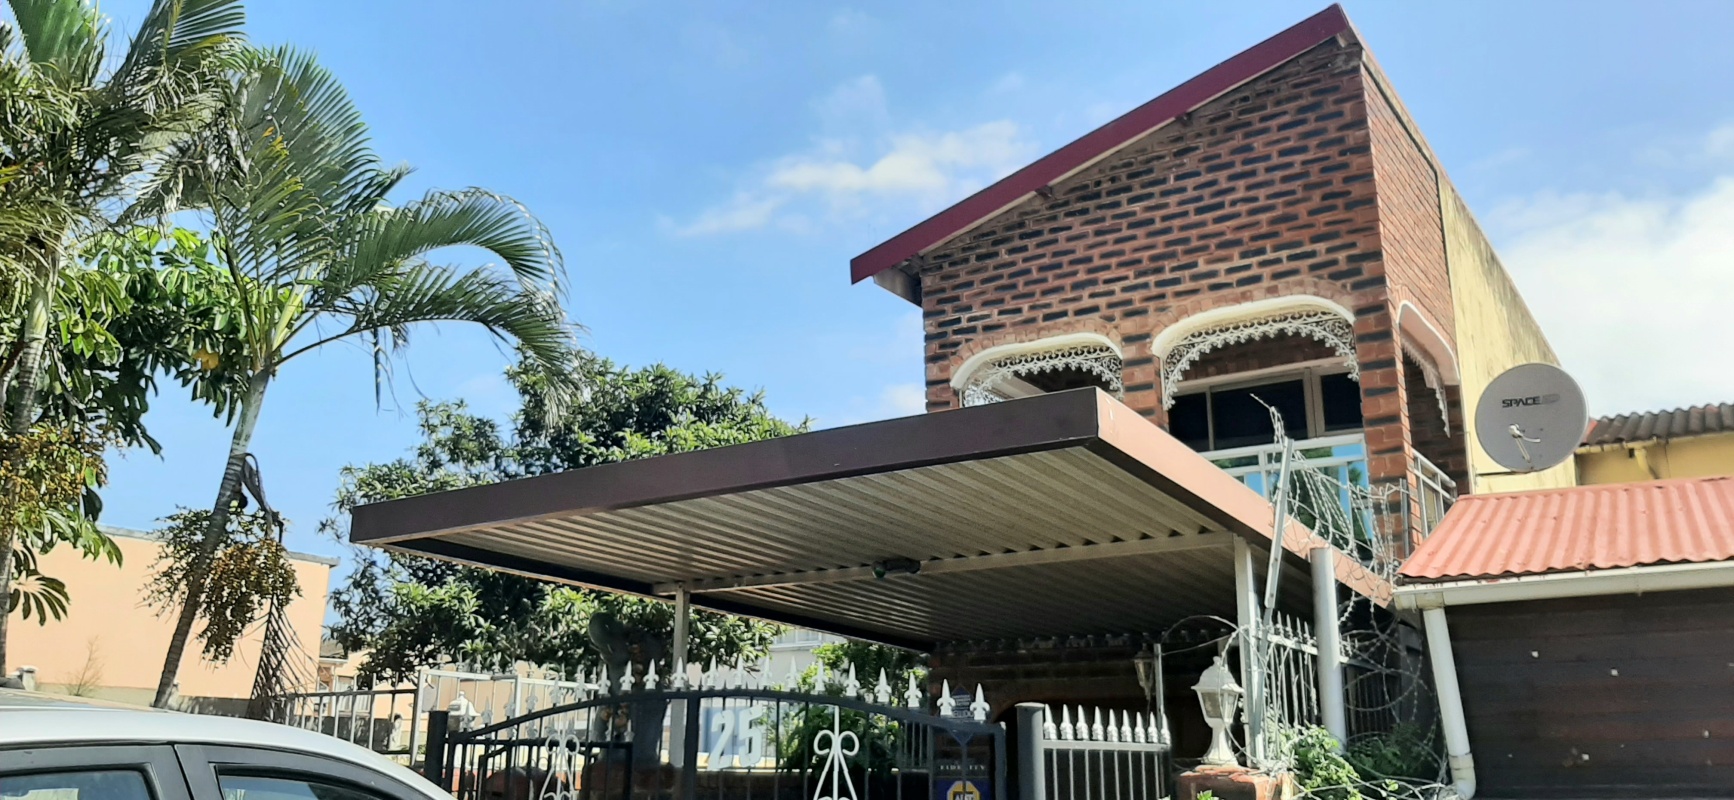 3 Bedroom House  For Sale in Newlands West | 1359993 | Property.CoZa